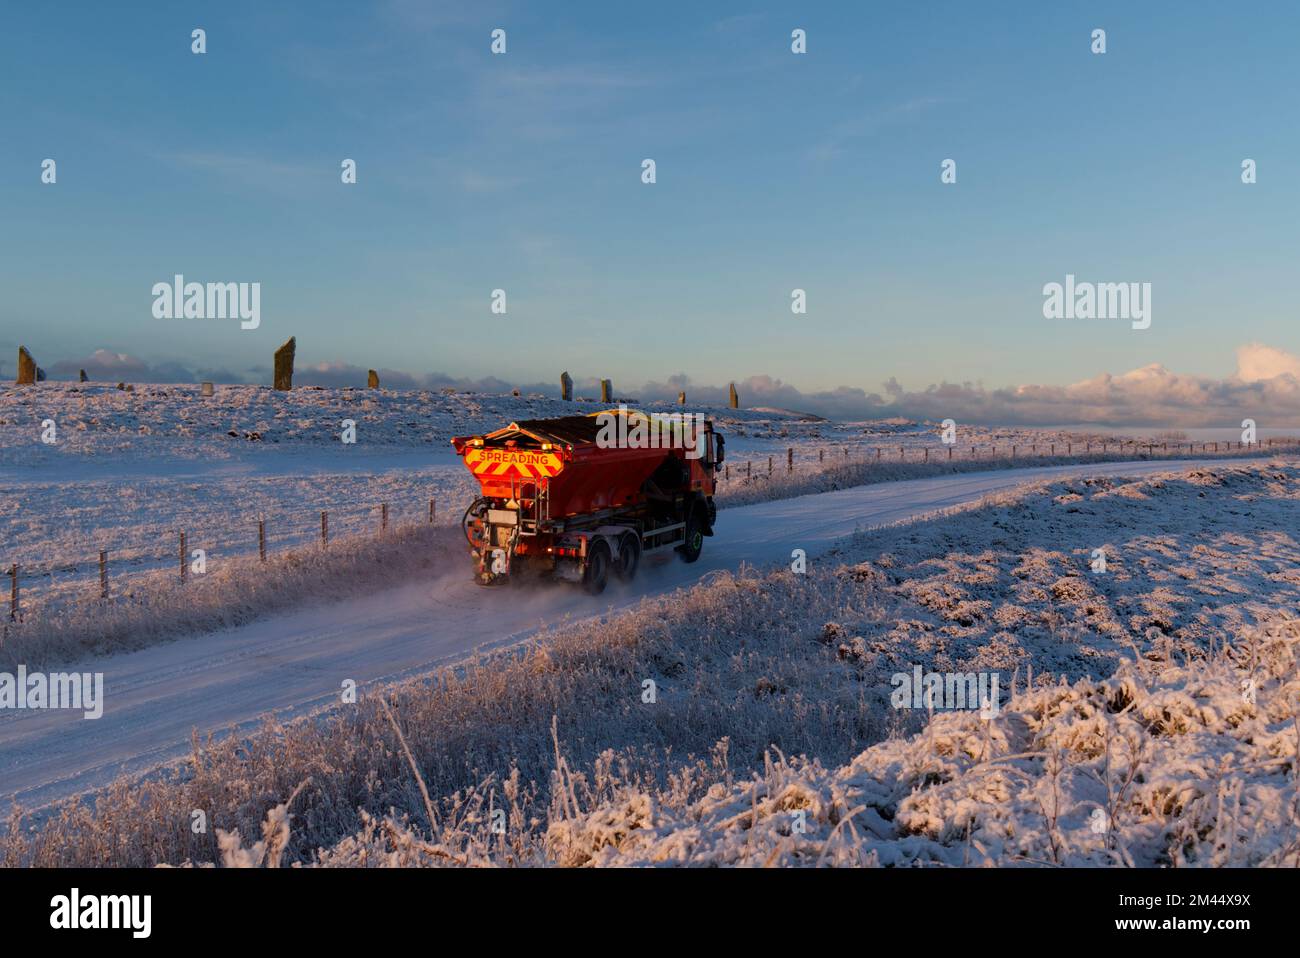 Gritter lorry on icy road, Scotland Stock Photo